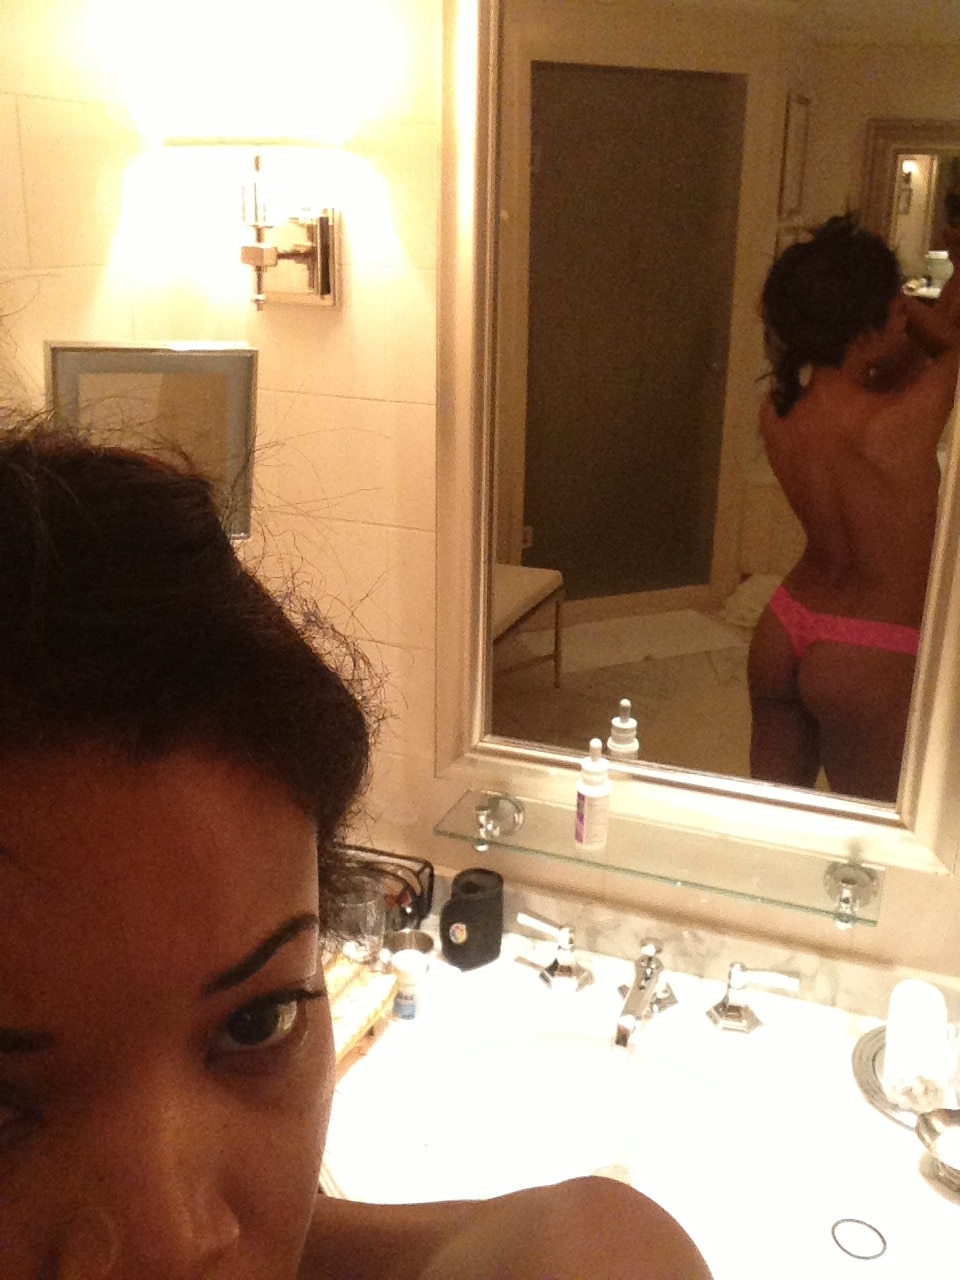 Gabrielle Union Nude Archives - All Sorts Here!